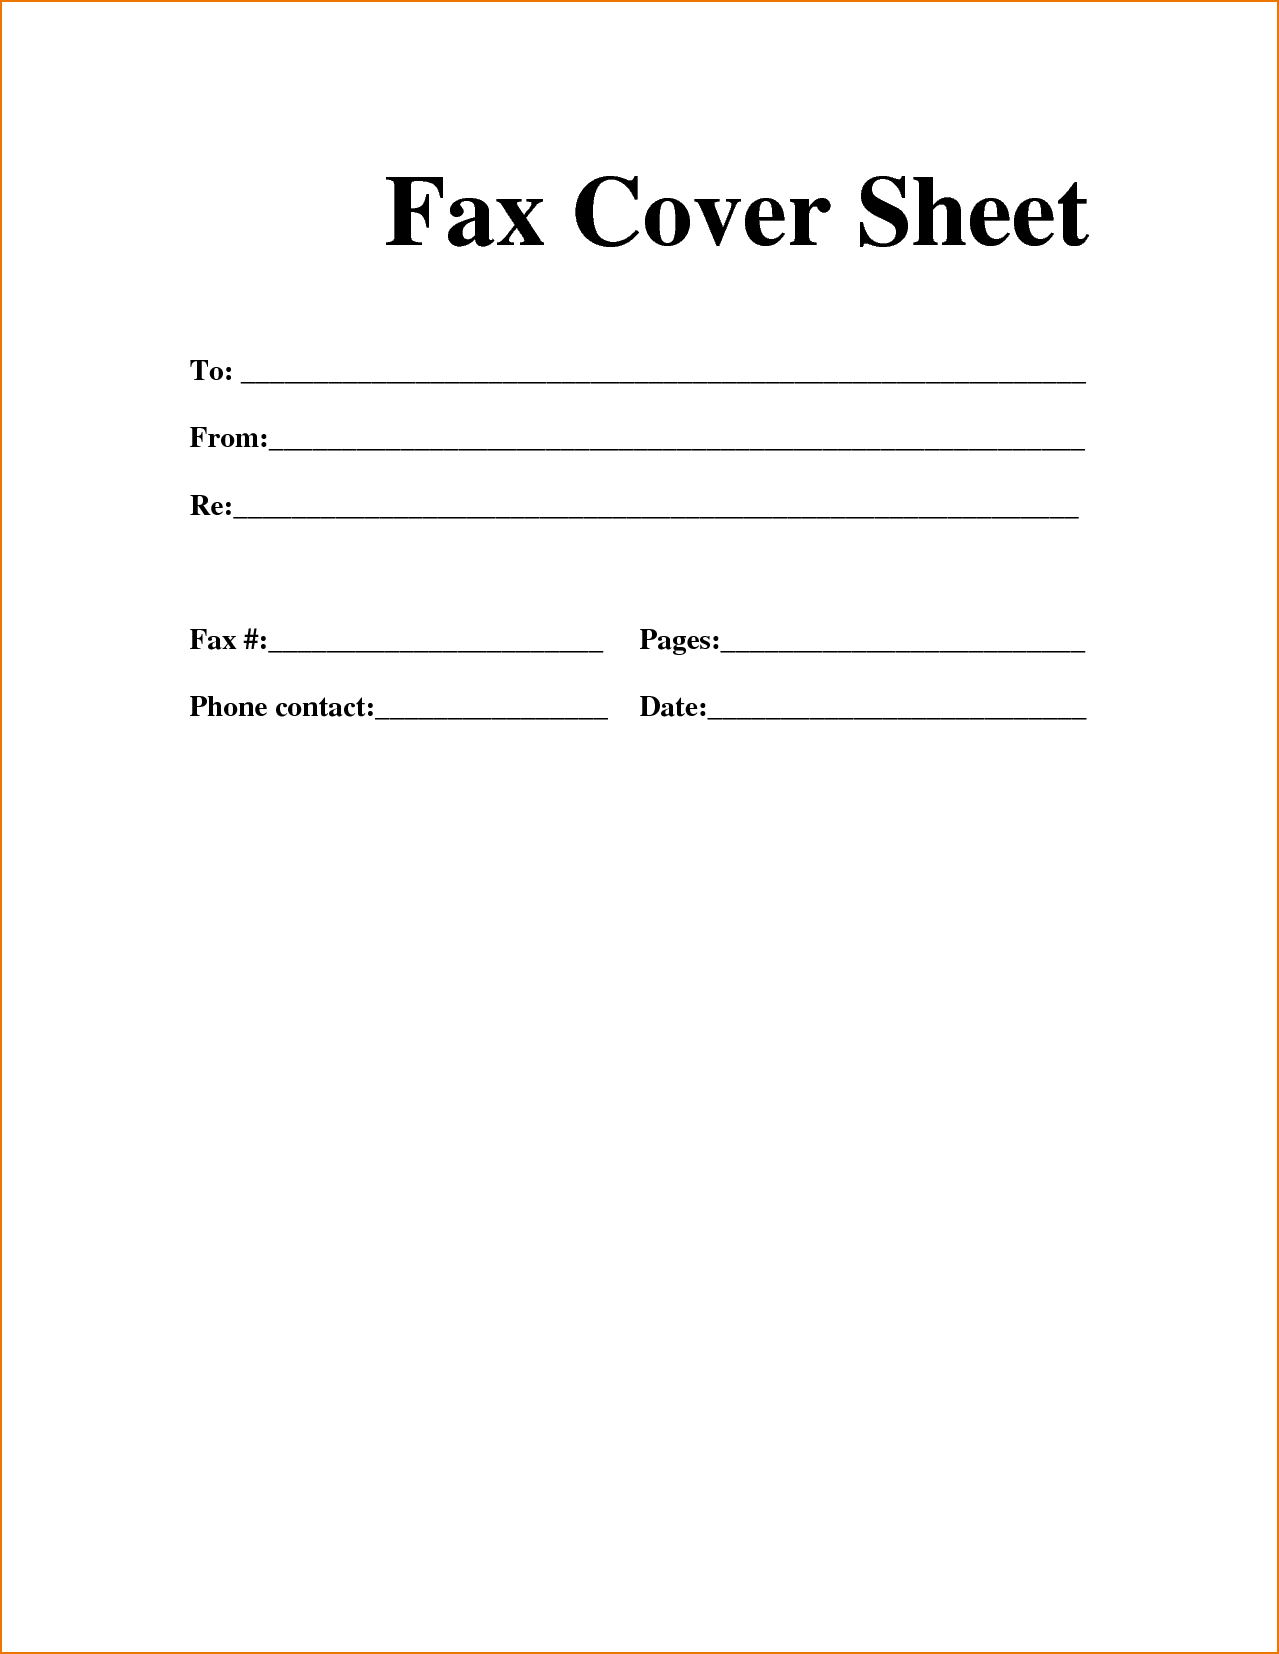 Sample Personal Fax Cover Sheet | Template In 2019 | Cover Sheet - Free Printable Fax Cover Page